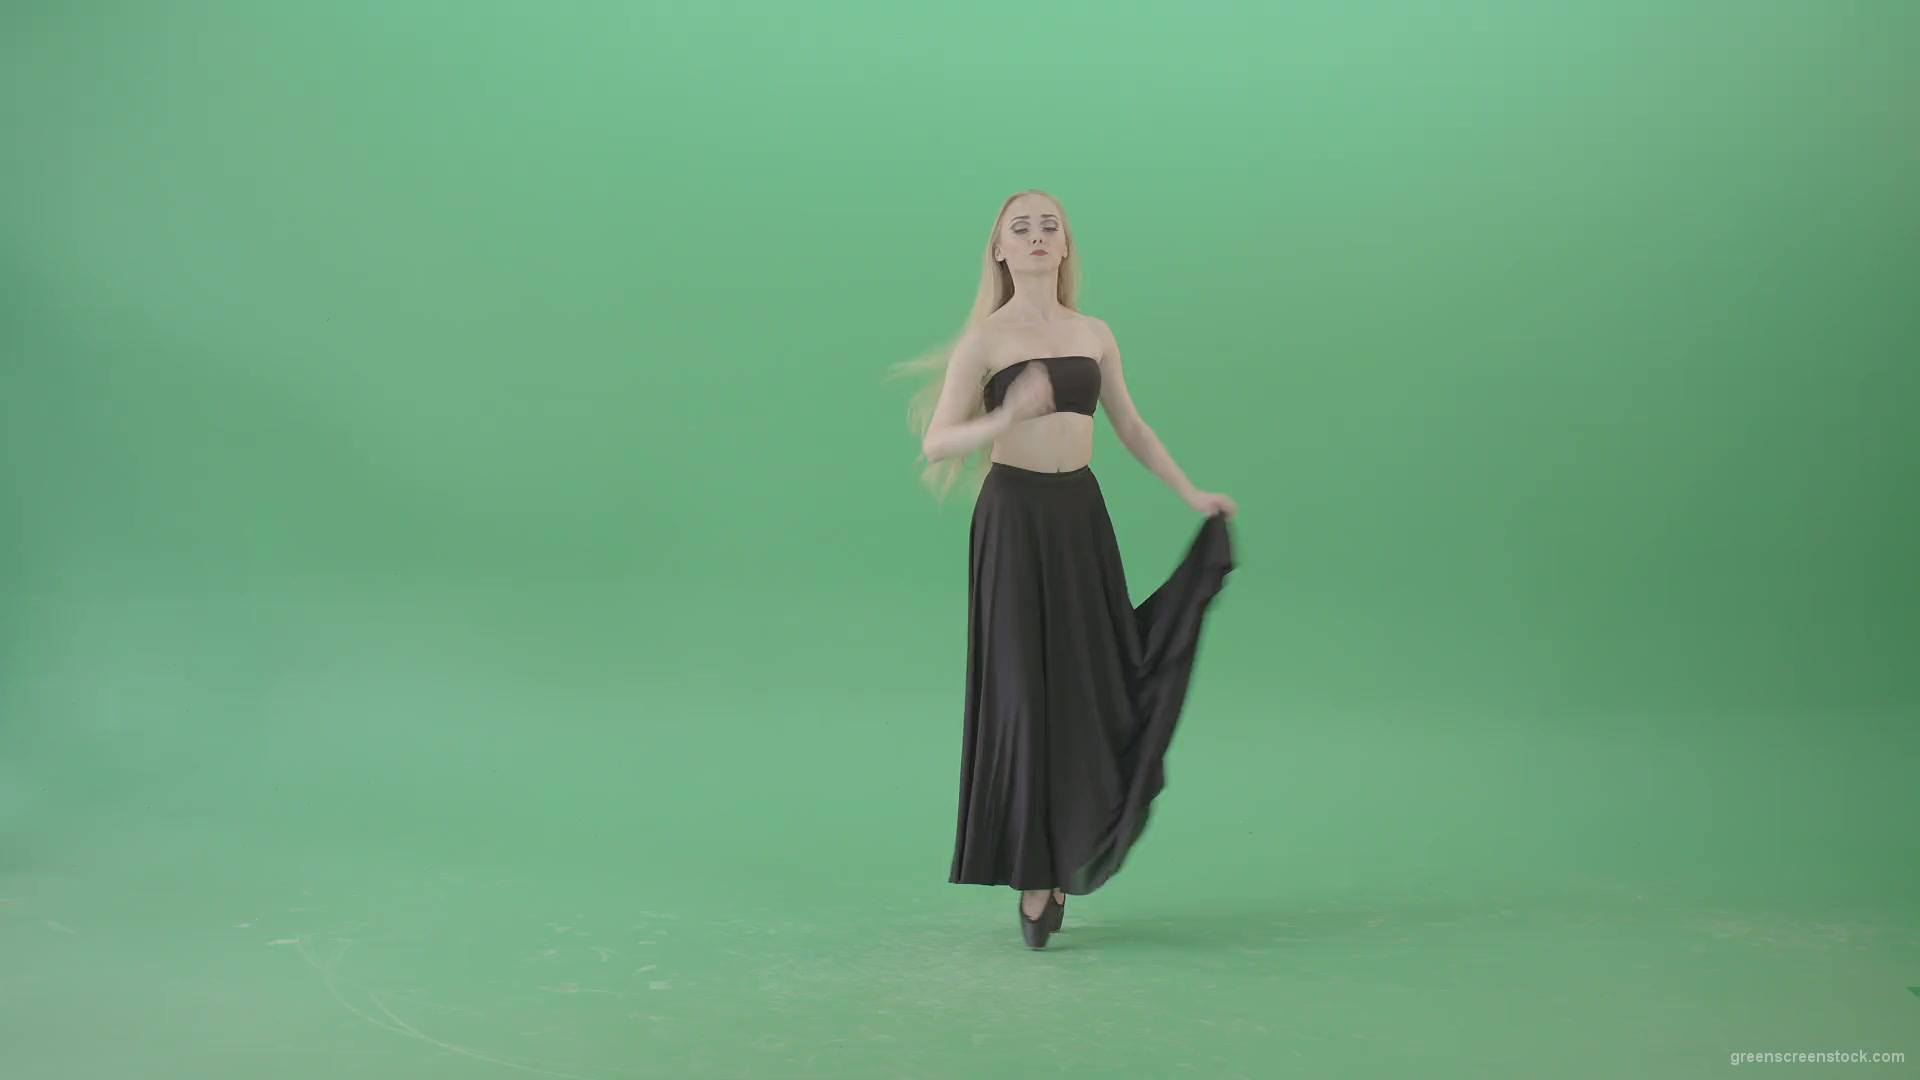 Spinning-isolated-on-green-screen-ballet-young-woman-ballerin-in-black-costume-4K-Video-Footage-1920_001 Green Screen Stock